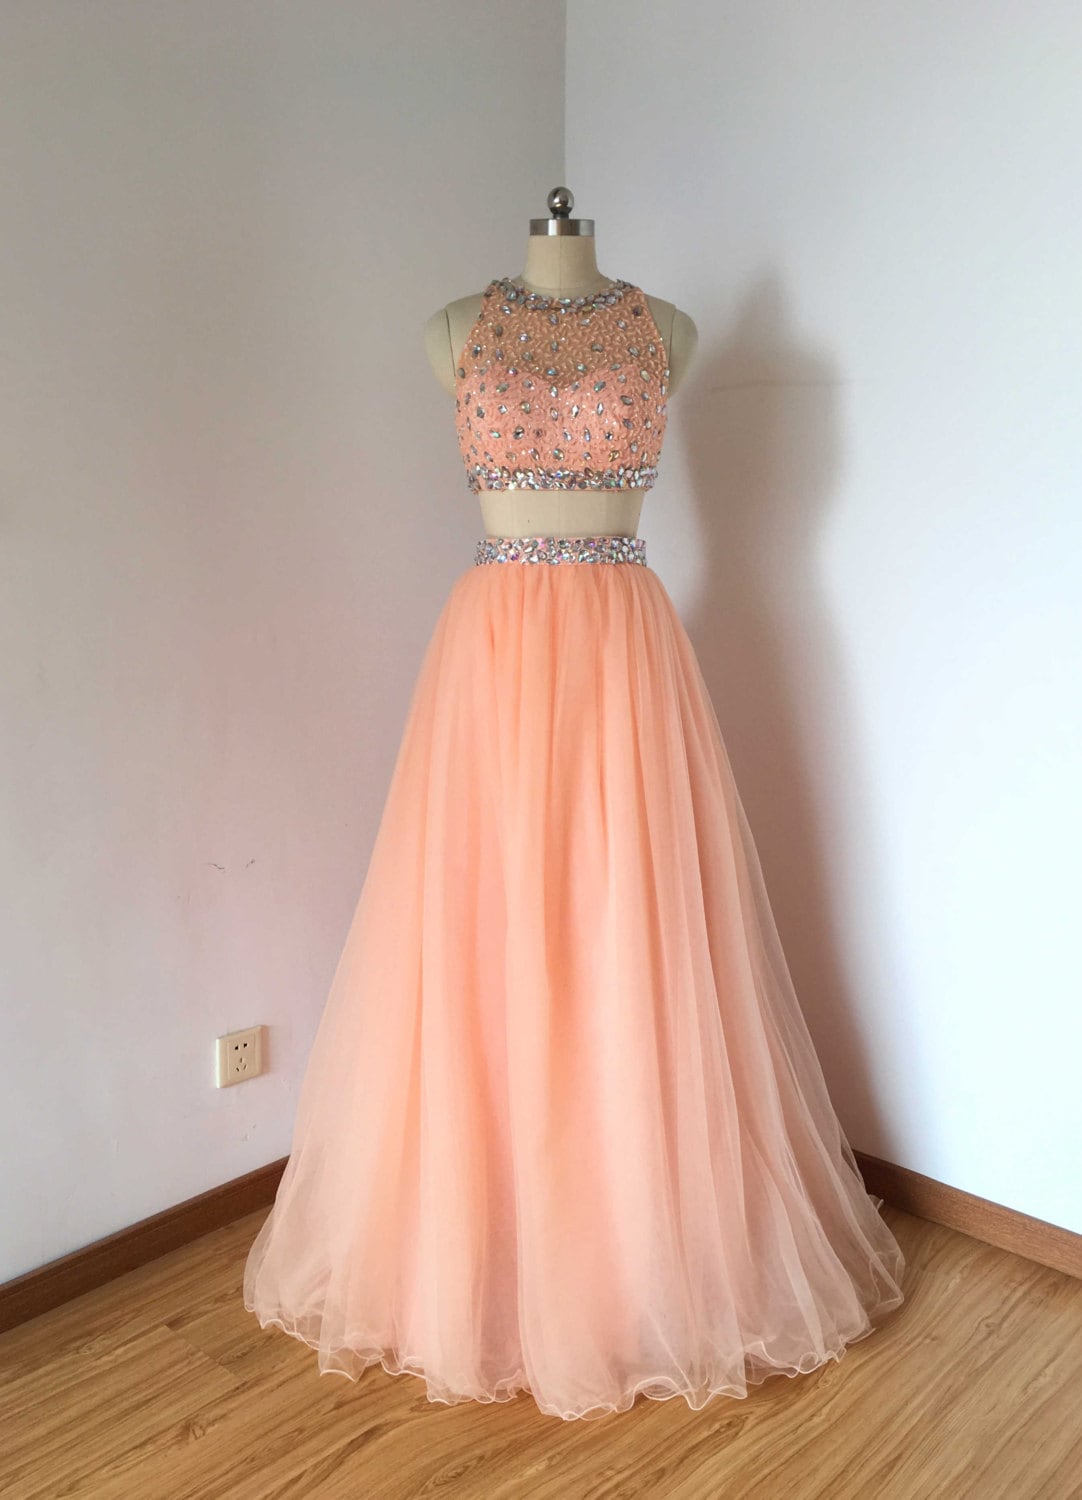 Cheap Two Piece Prom Dresses, Sexy 2 Piece Prom Gowns On Sale